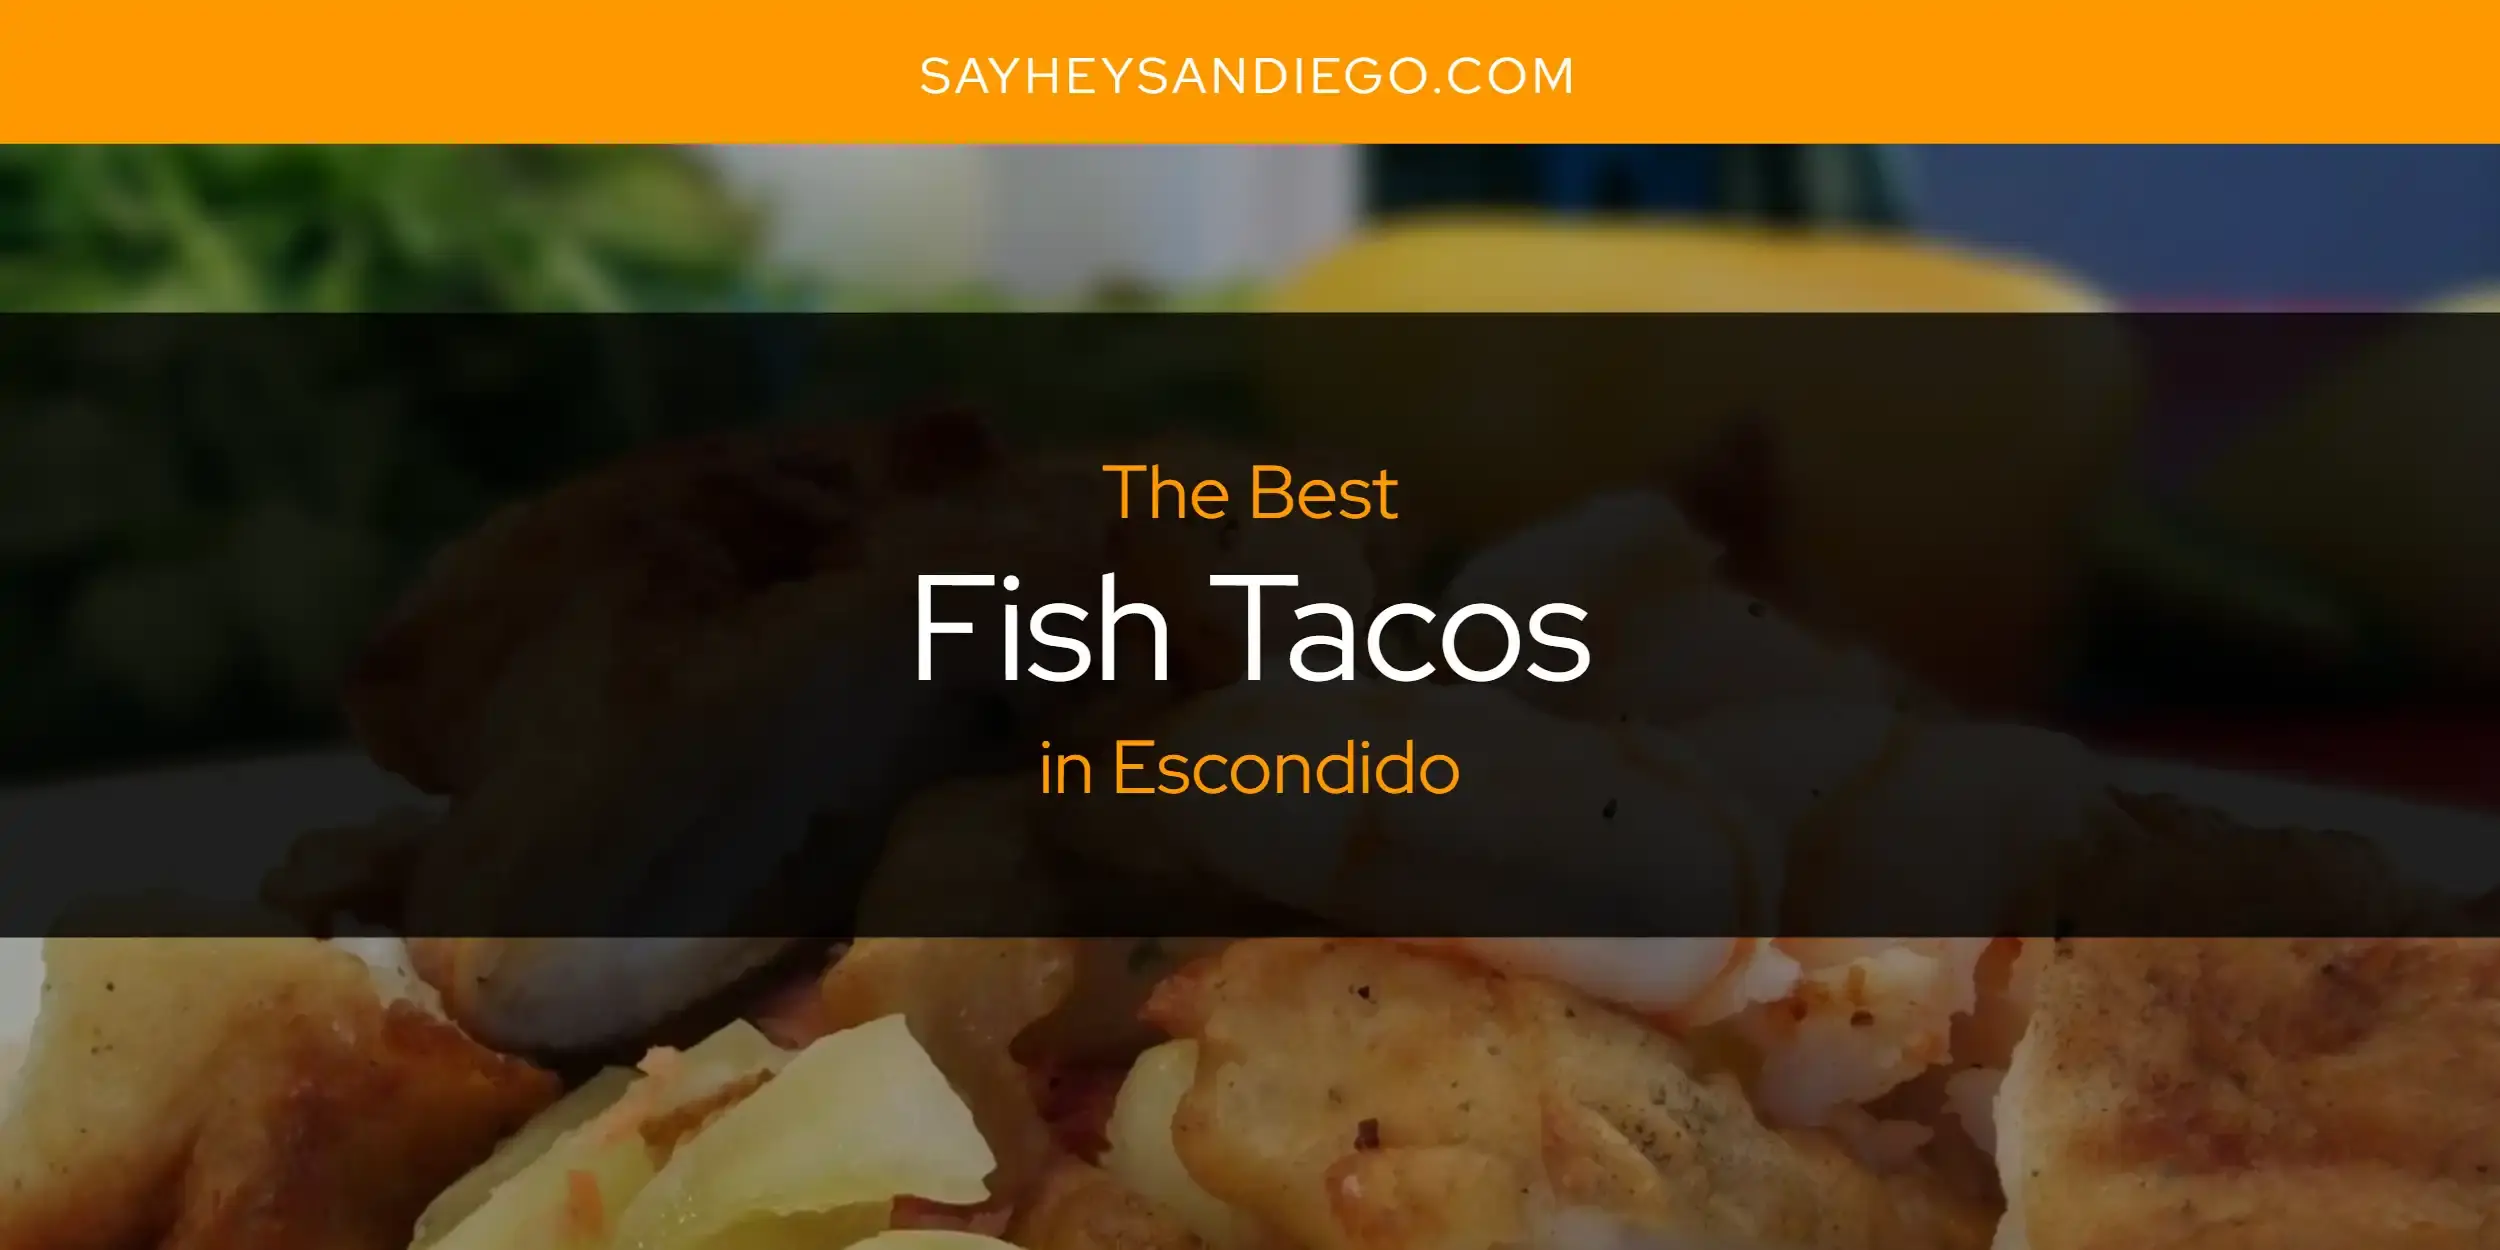 Best Fish Tacos in Escondido? Here's the Top 13